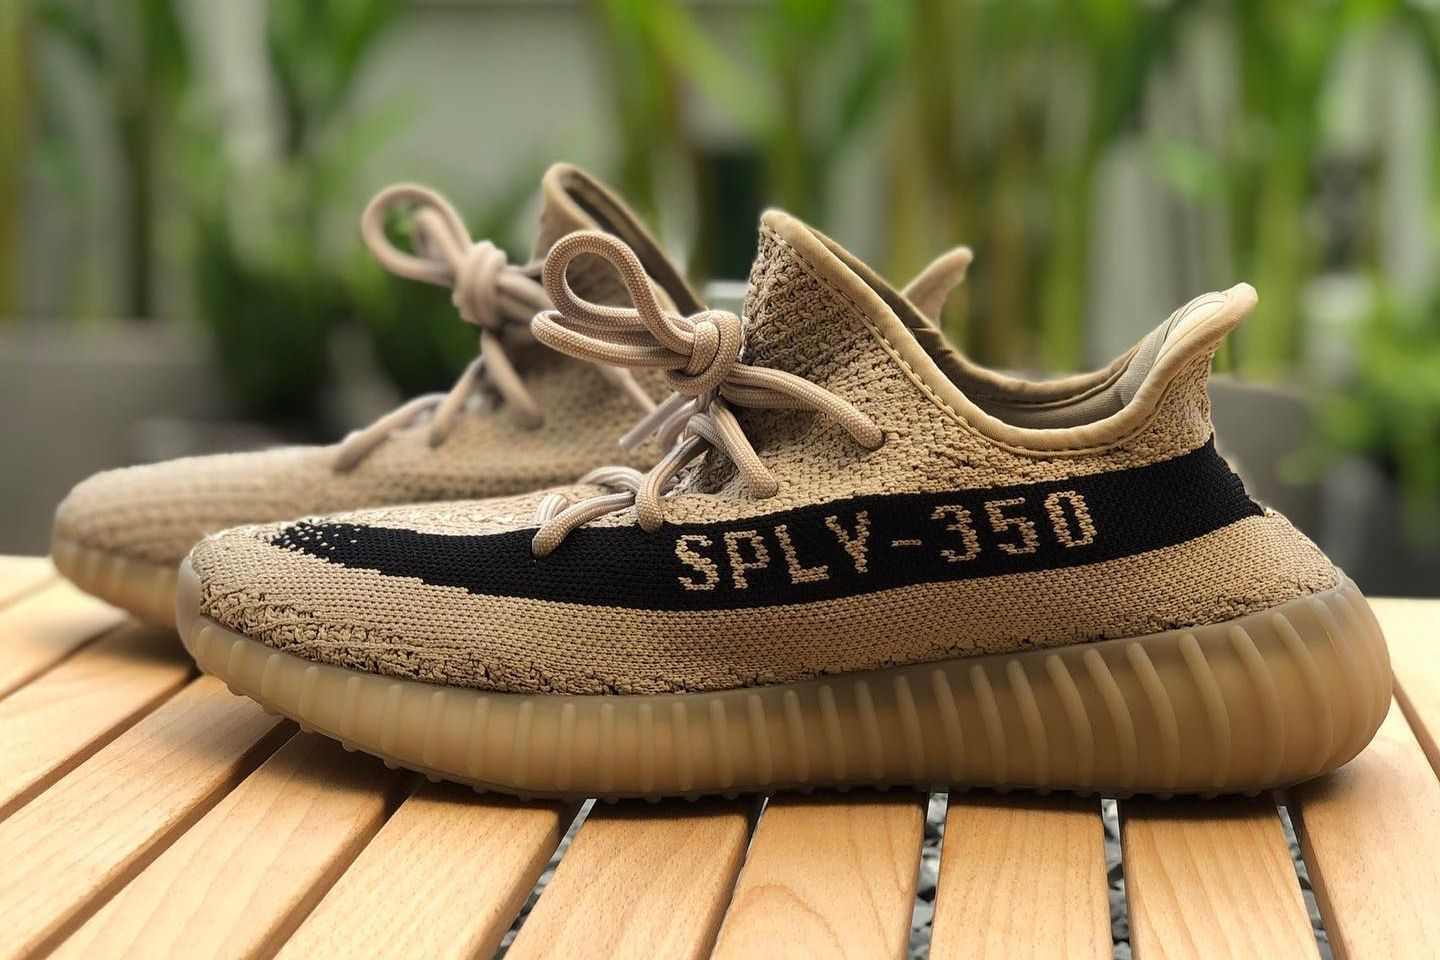 adidas Yeezy BOOST 350 V2 Beige and Black